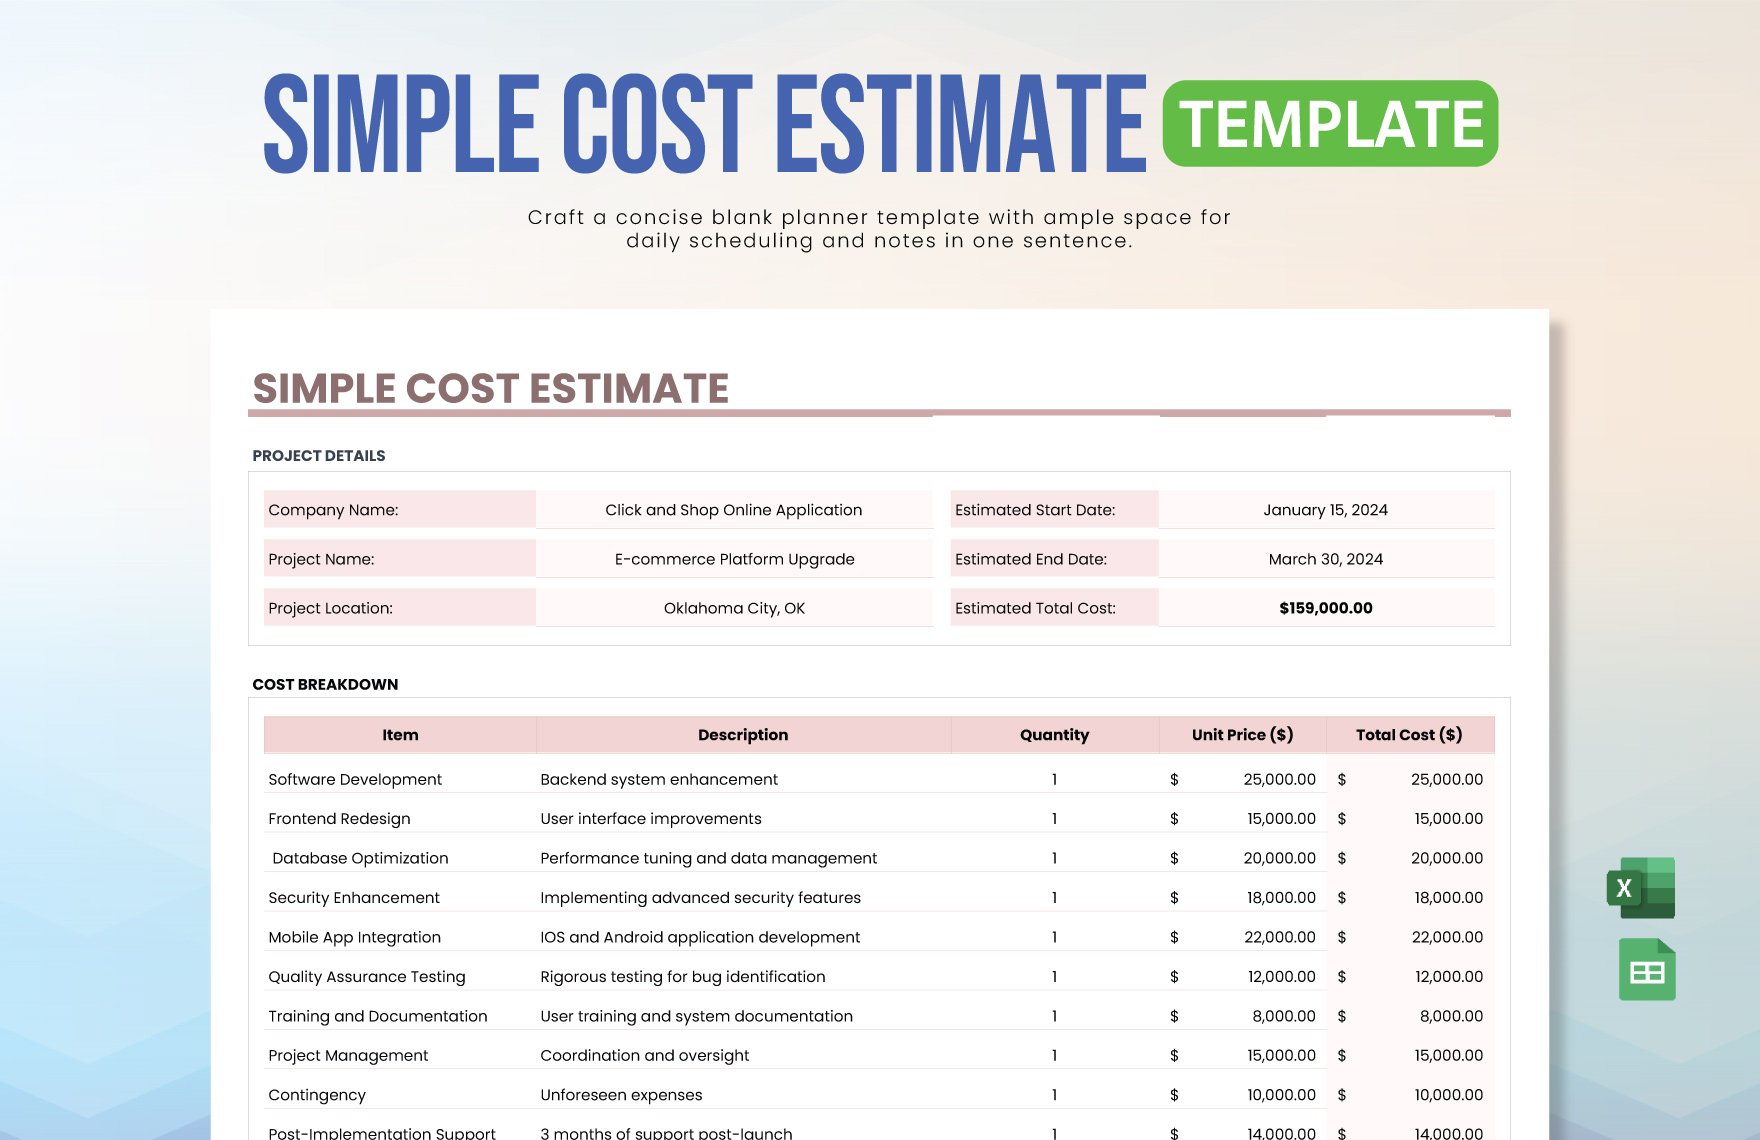 Free Simple Cost Estimate Template in Excel, Google Sheets